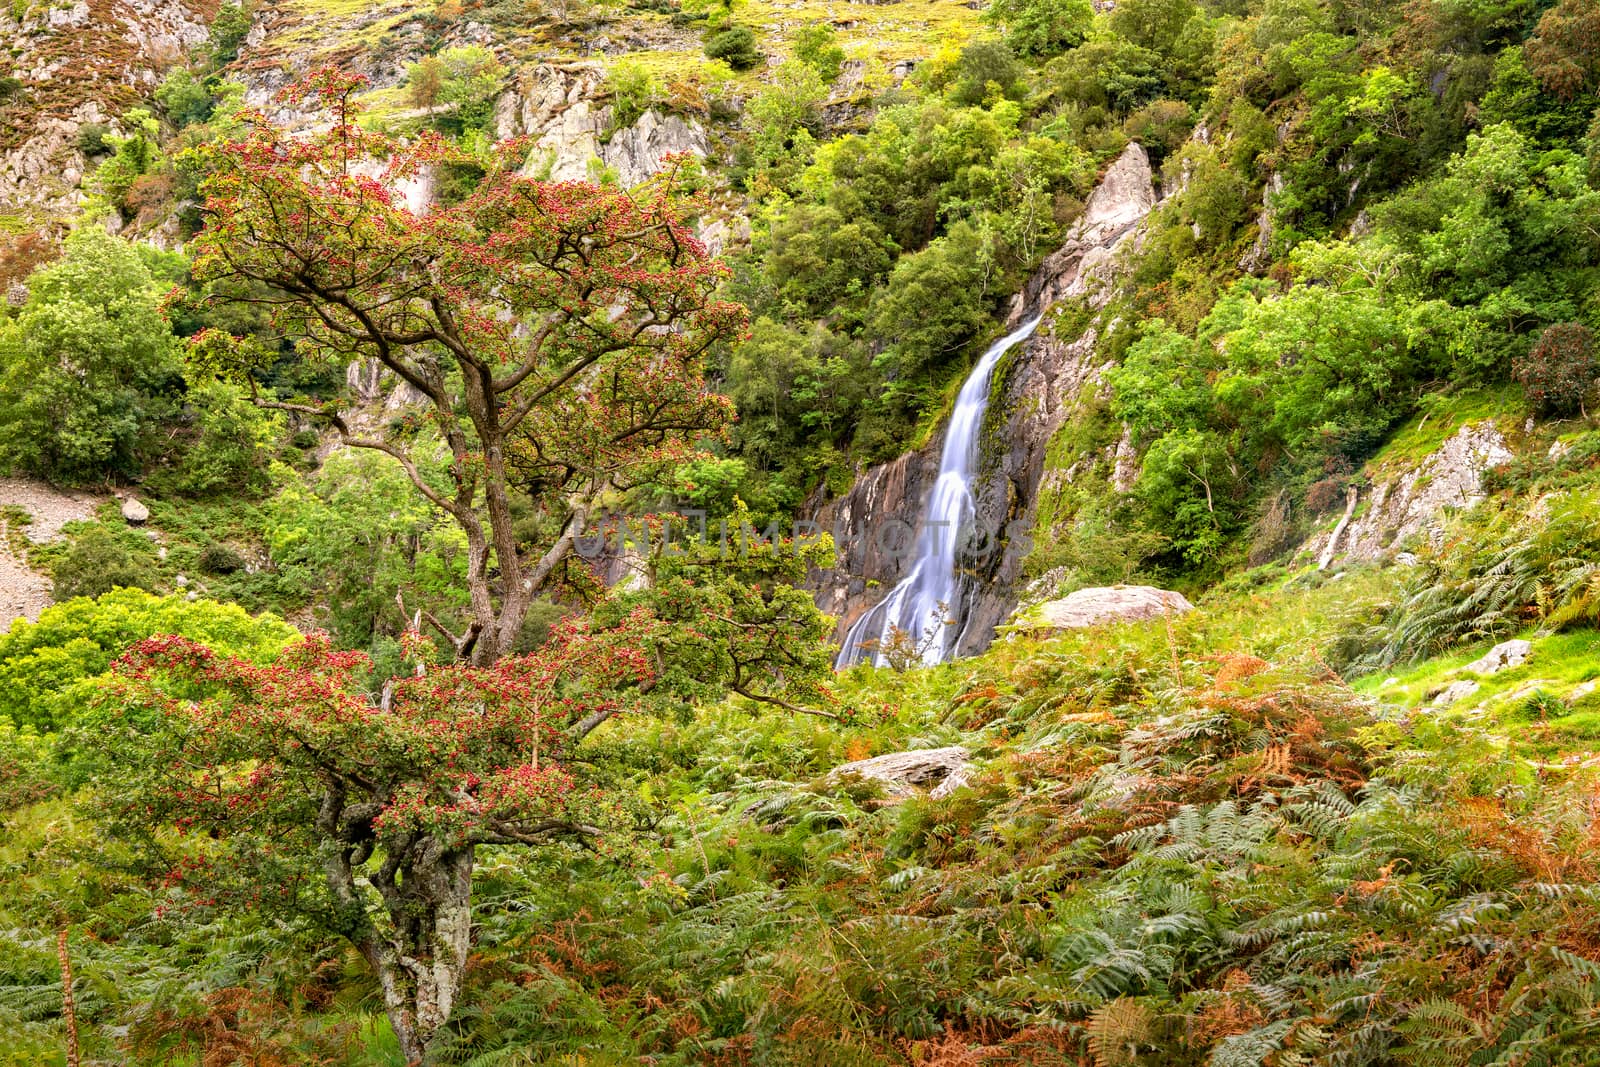 View of Aber Falls in Showdonia National Park